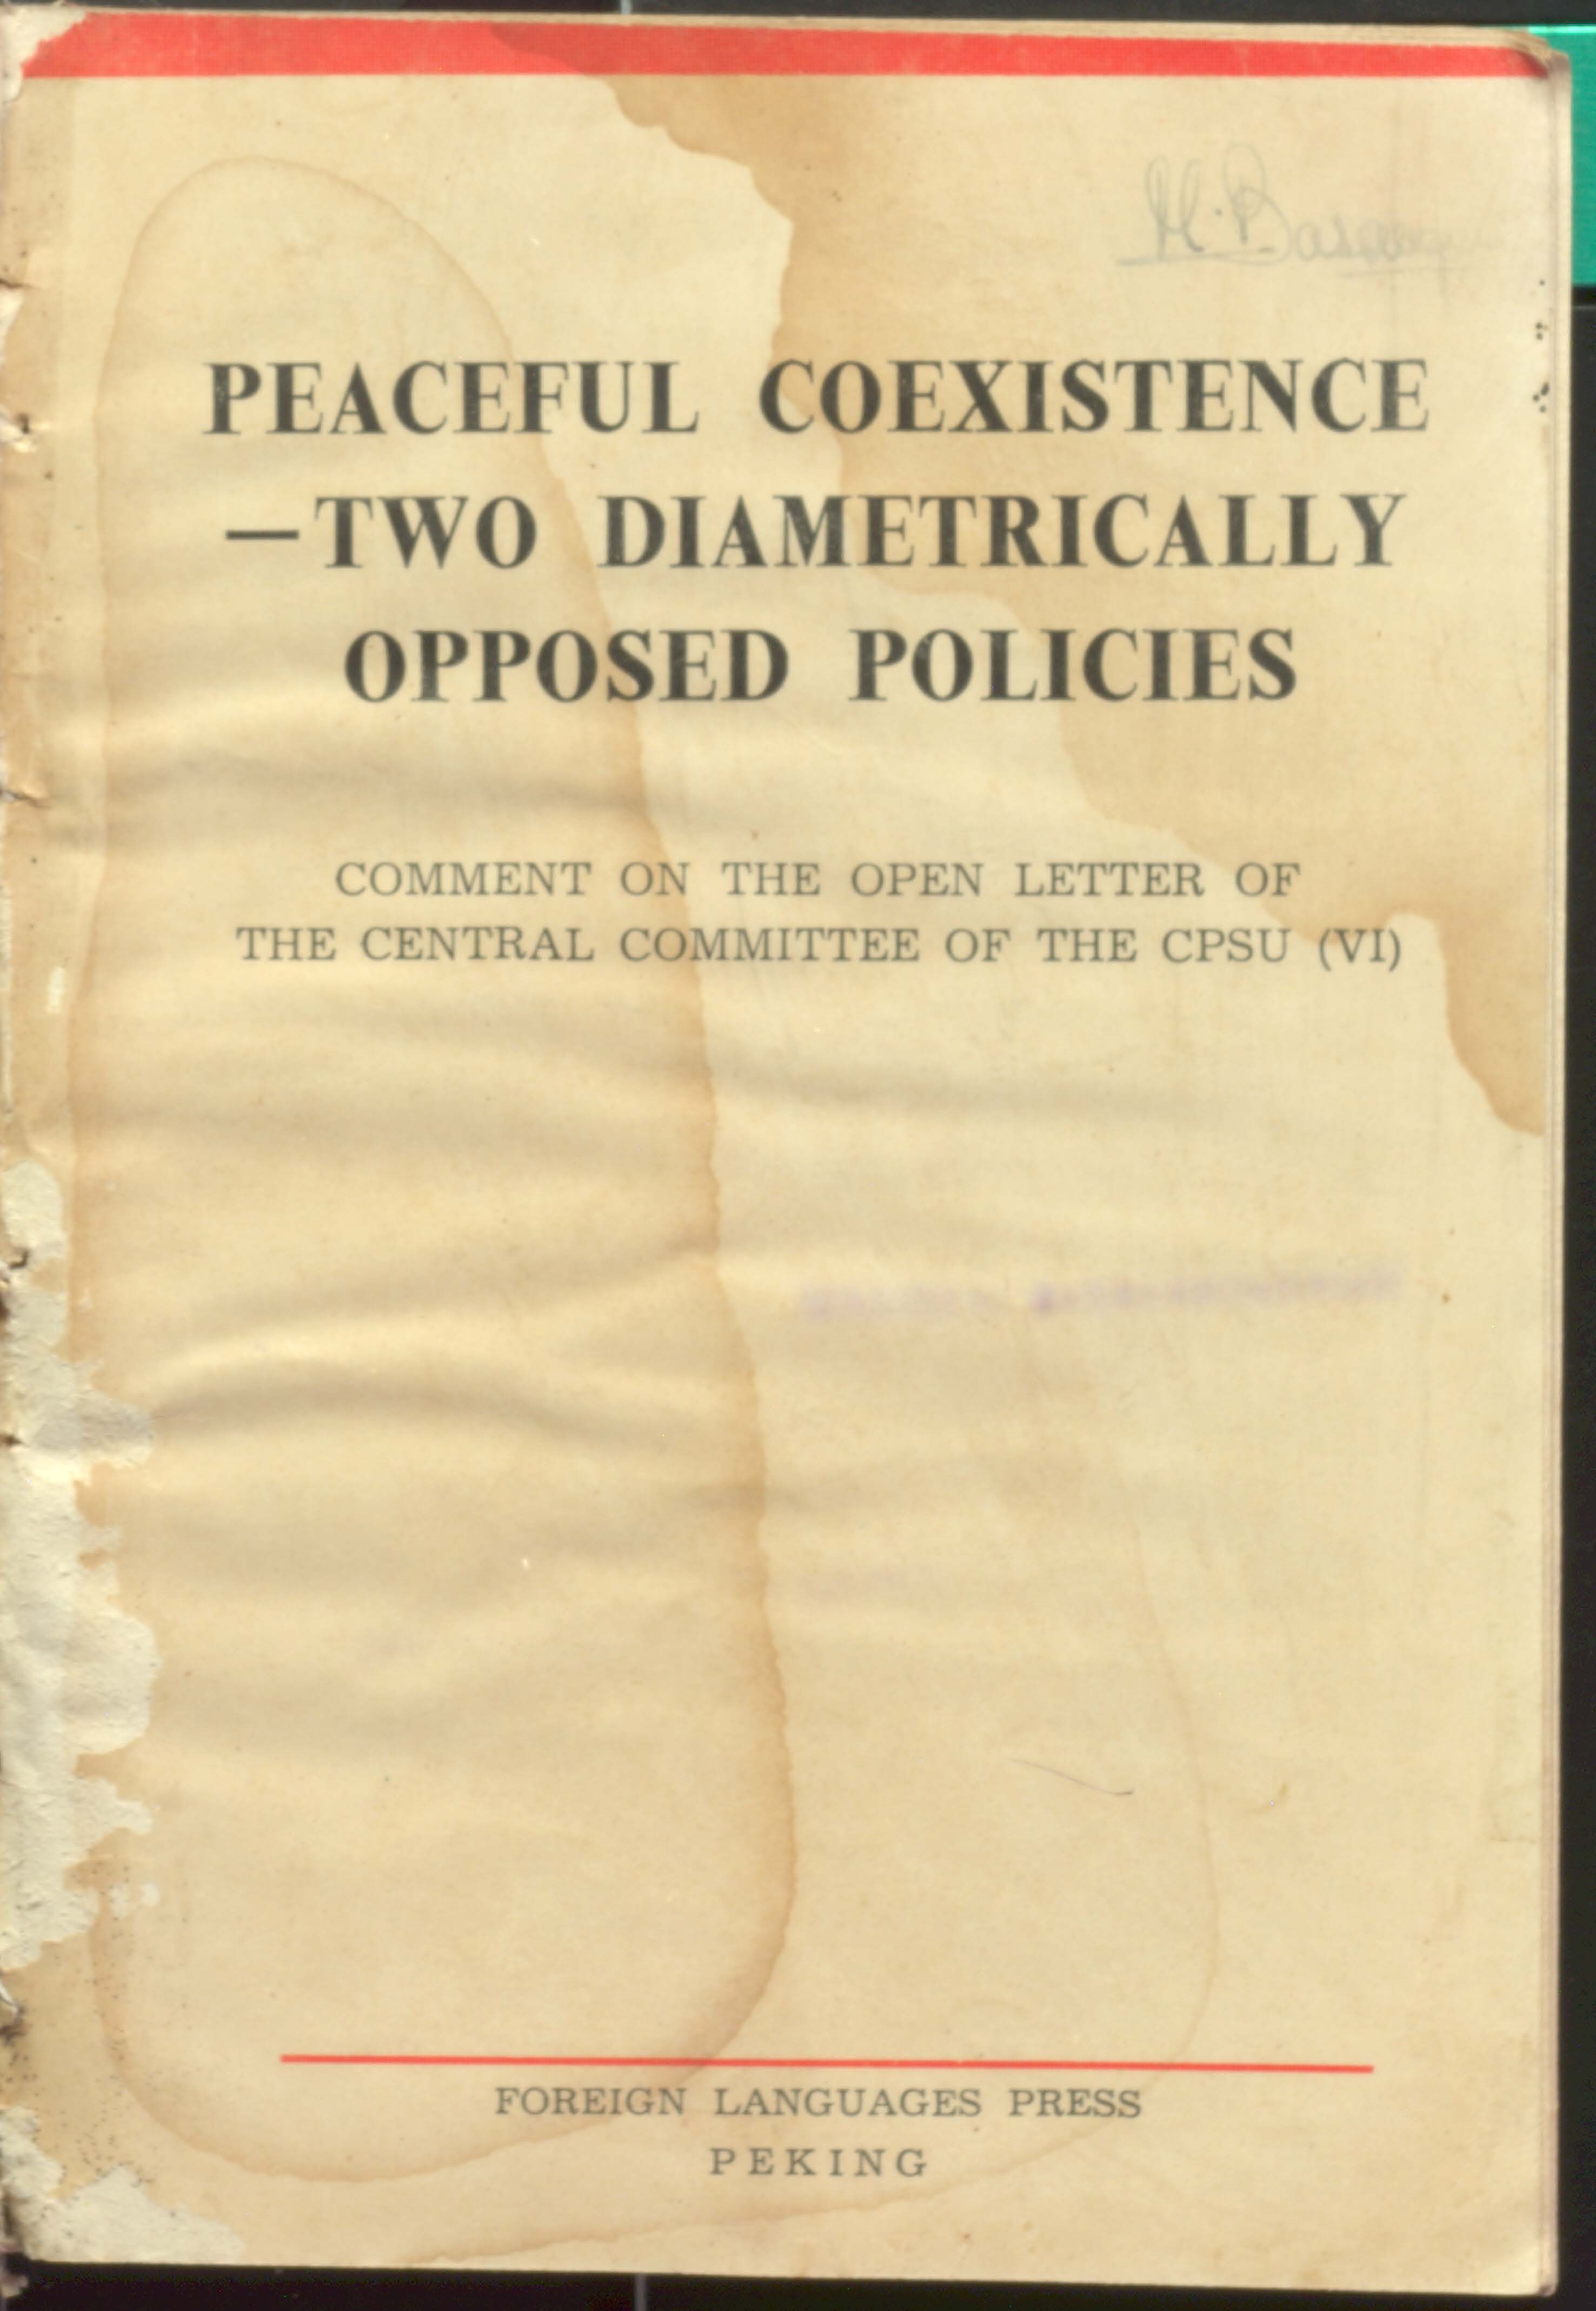 Peaceful Coexistence - Two Diametrically Opposed Policies (CPSU-VI)